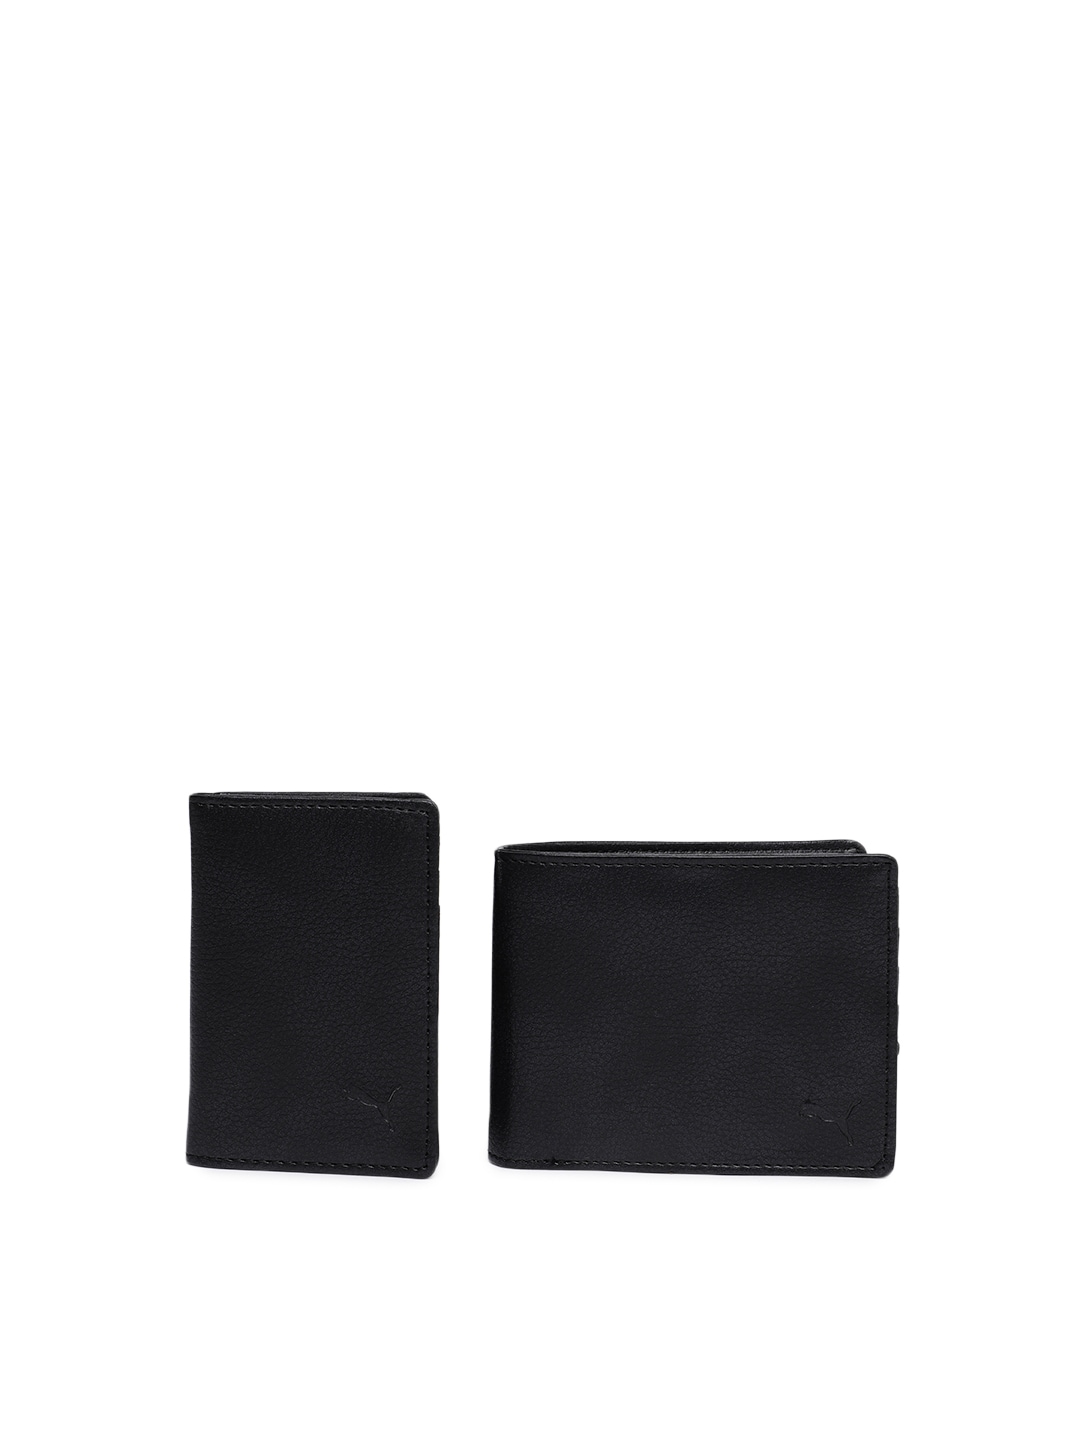 Puma Unisex Black Solid Two Fold Wallet Price in India